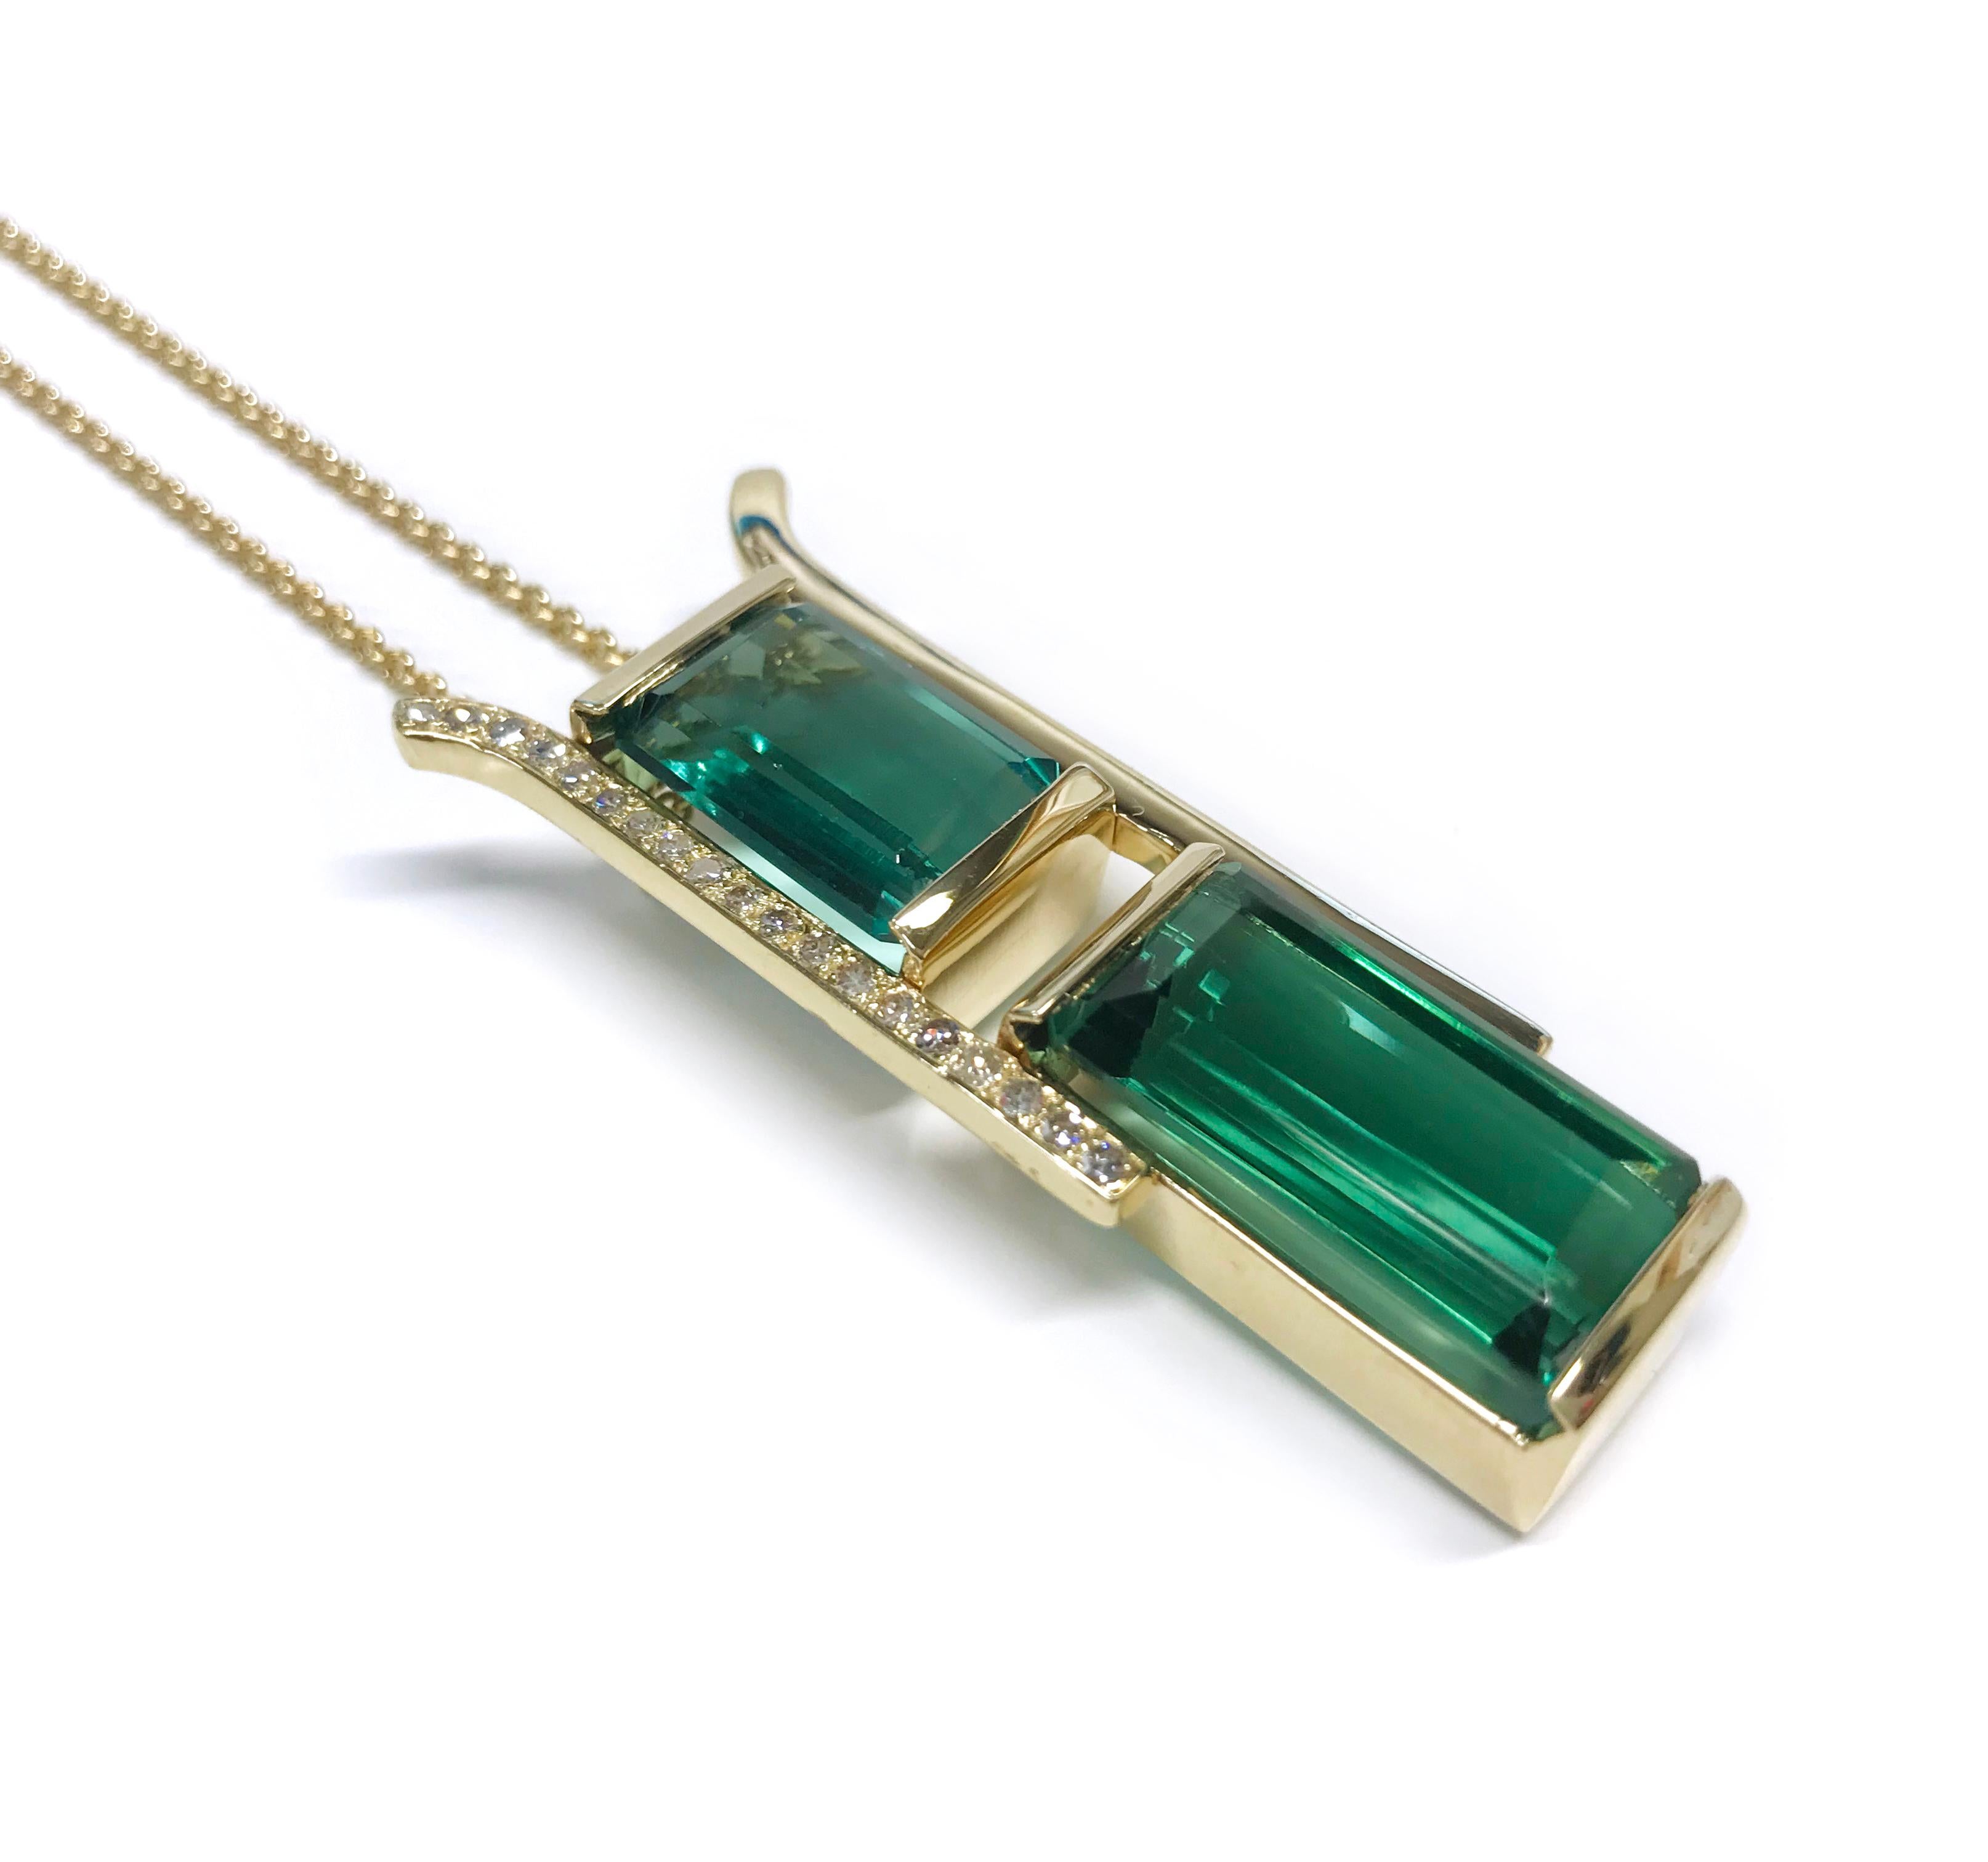 14 Karat Green Tourmaline Diamond Pendant Necklace. Two step-cut green Tourmalines are bezel-set in this large vertical pendant with two side gold bars. One Tourmaline measures 16.2mm x 11.2mm x 7.1mm for a total carat weight of 10.25ct and the